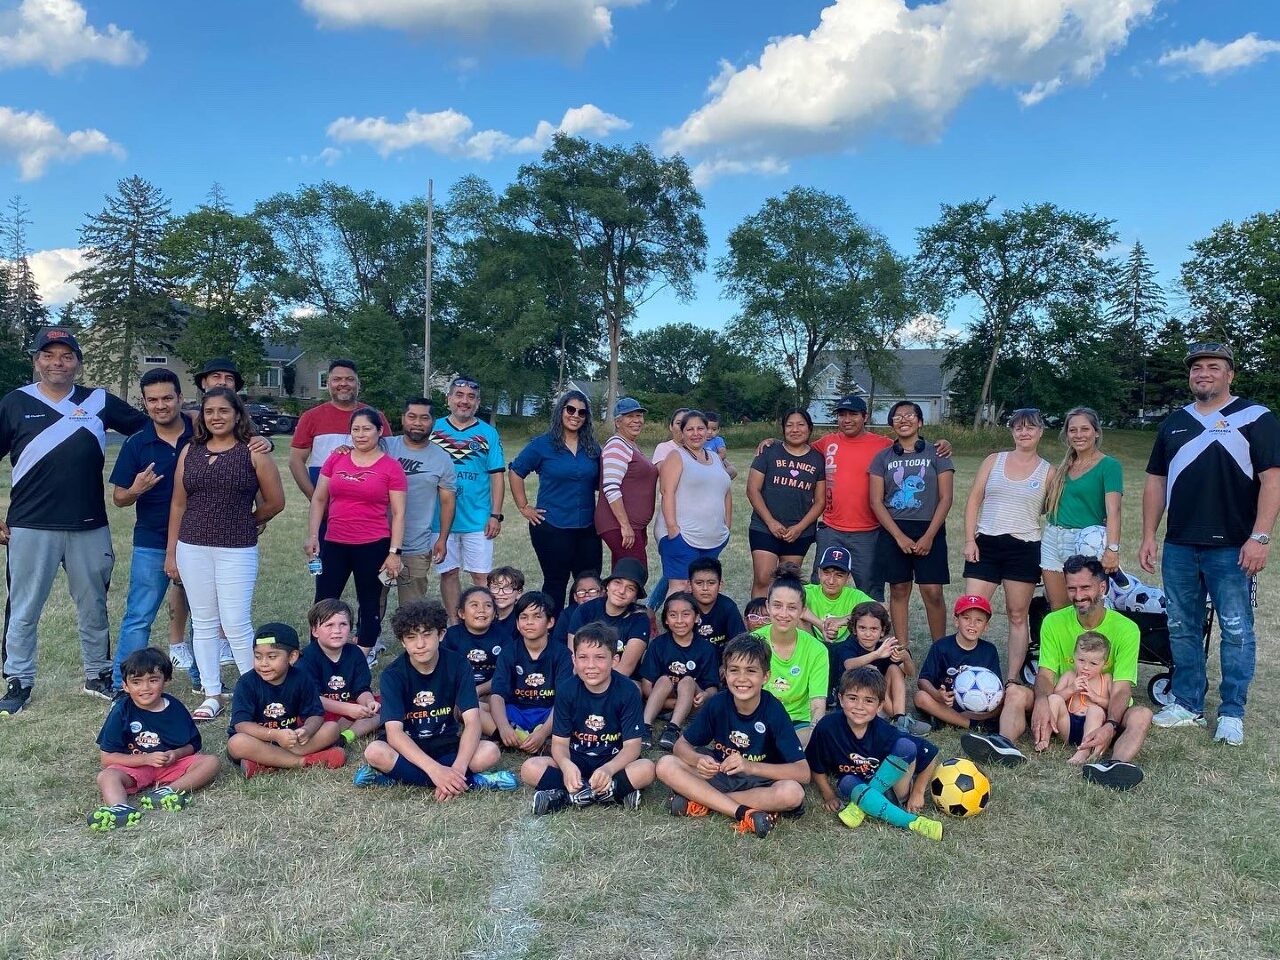 Youth, parents and staff at Esperanza United summer camp soccer game